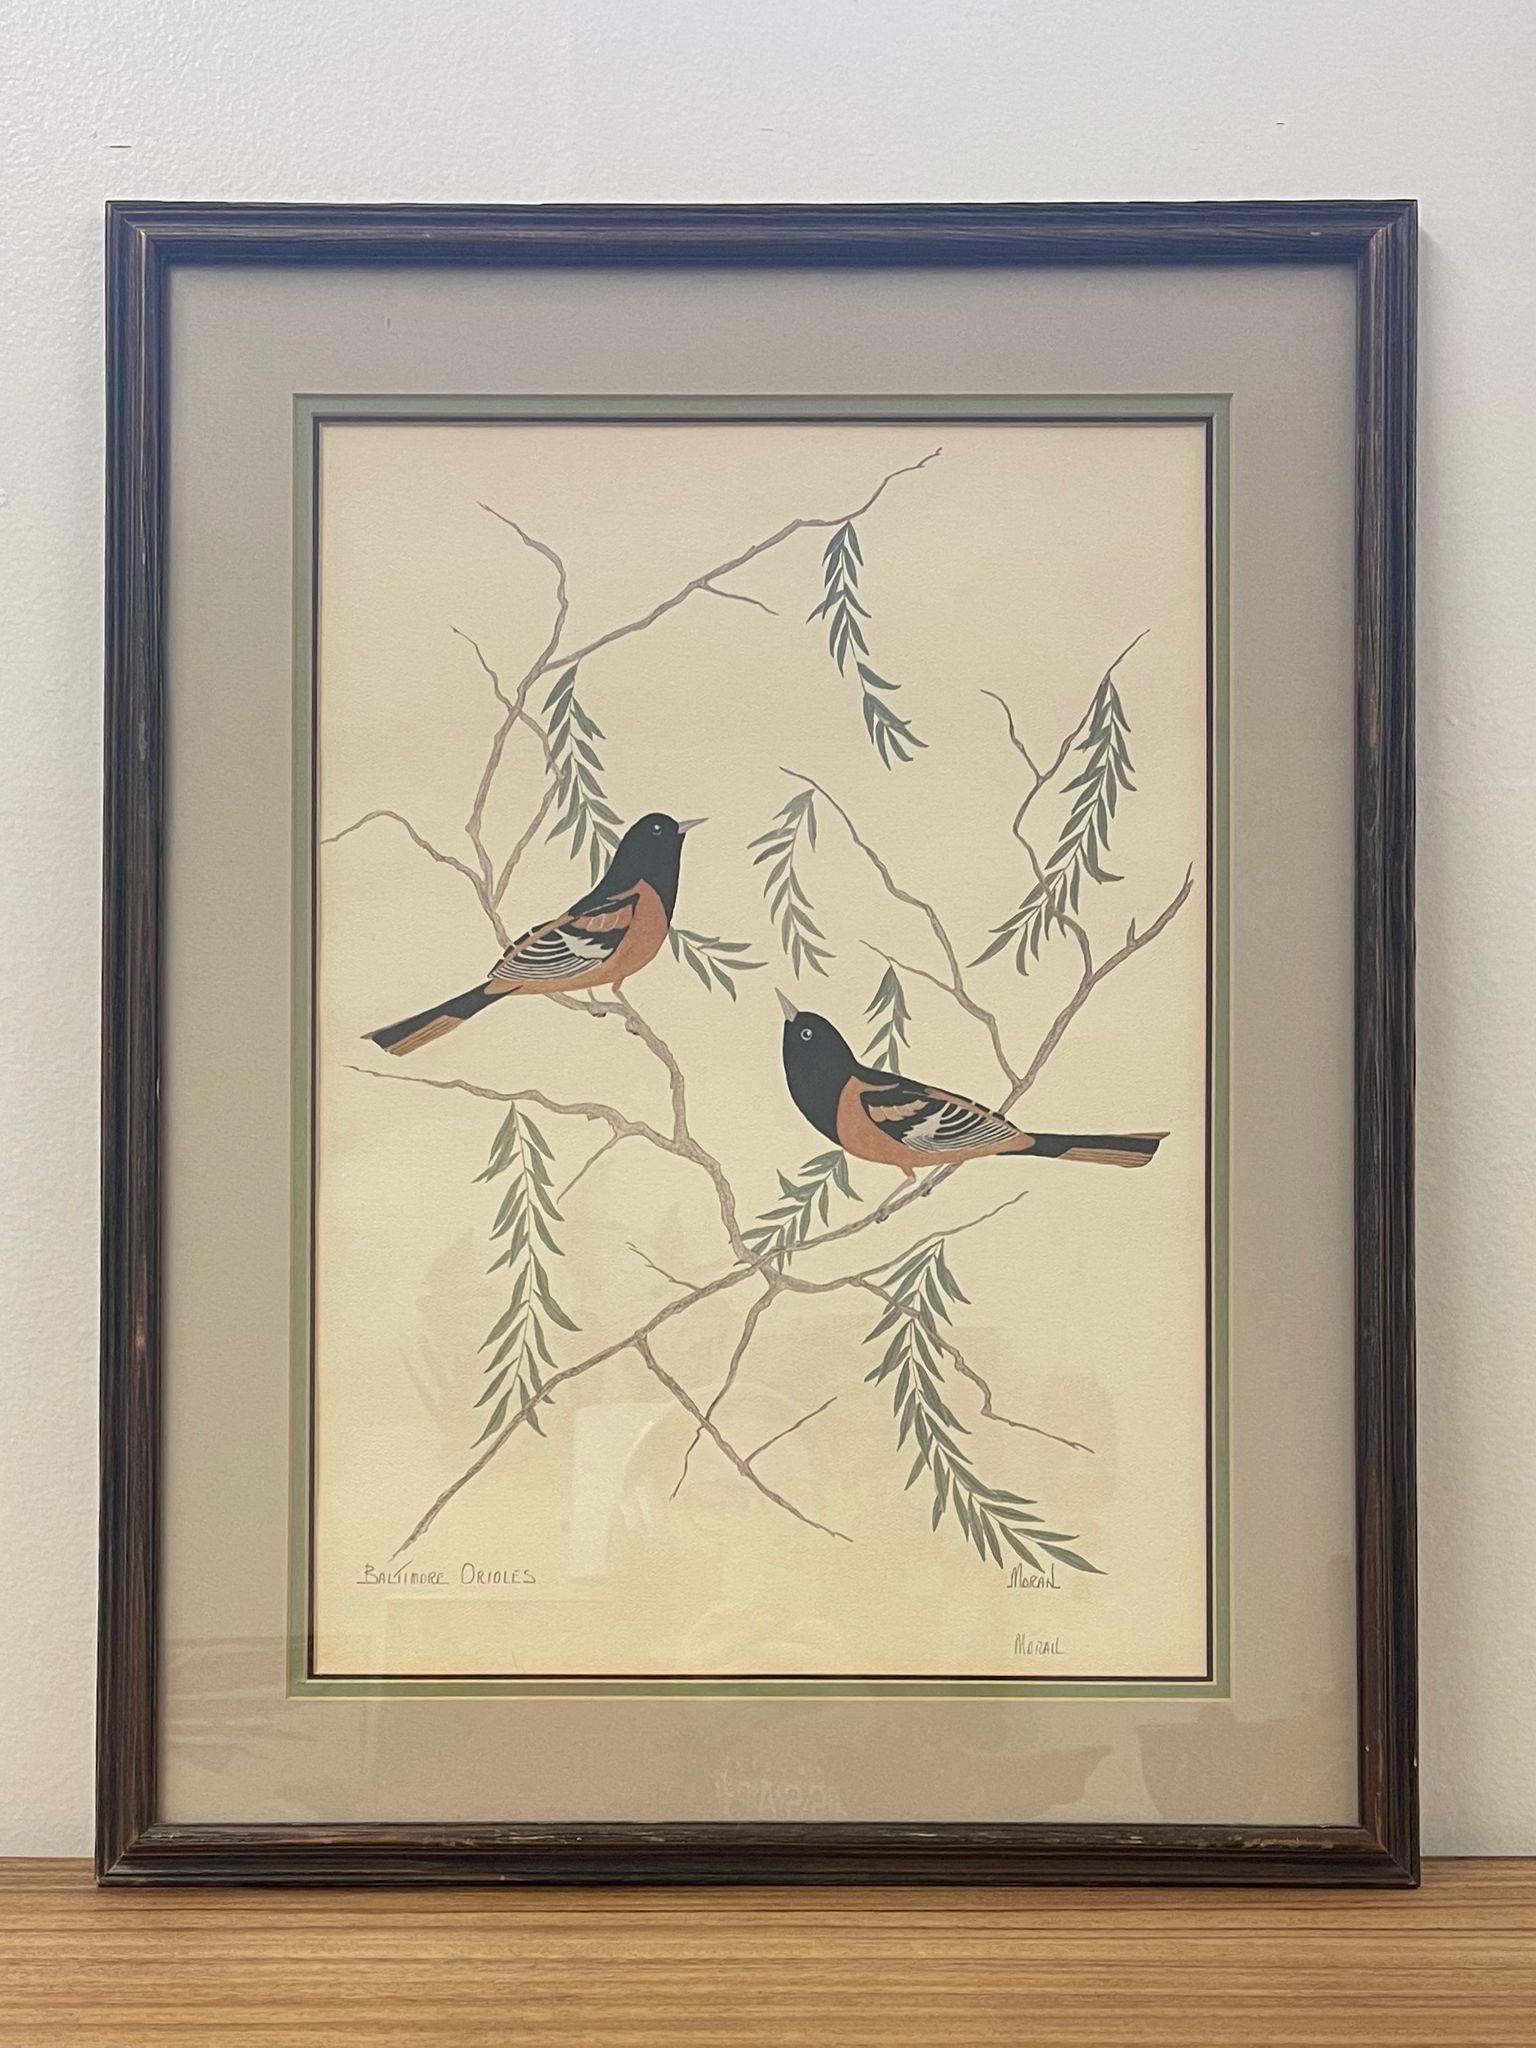 Vintage Artwork on Paper within a Wooden Frame. Possibly Pen and Watercolor. Signed at The Bottom Corner as Pictured. Vintage Condition Consistent with Age as Pictured.

Dimensions. 20 W ; 26 H